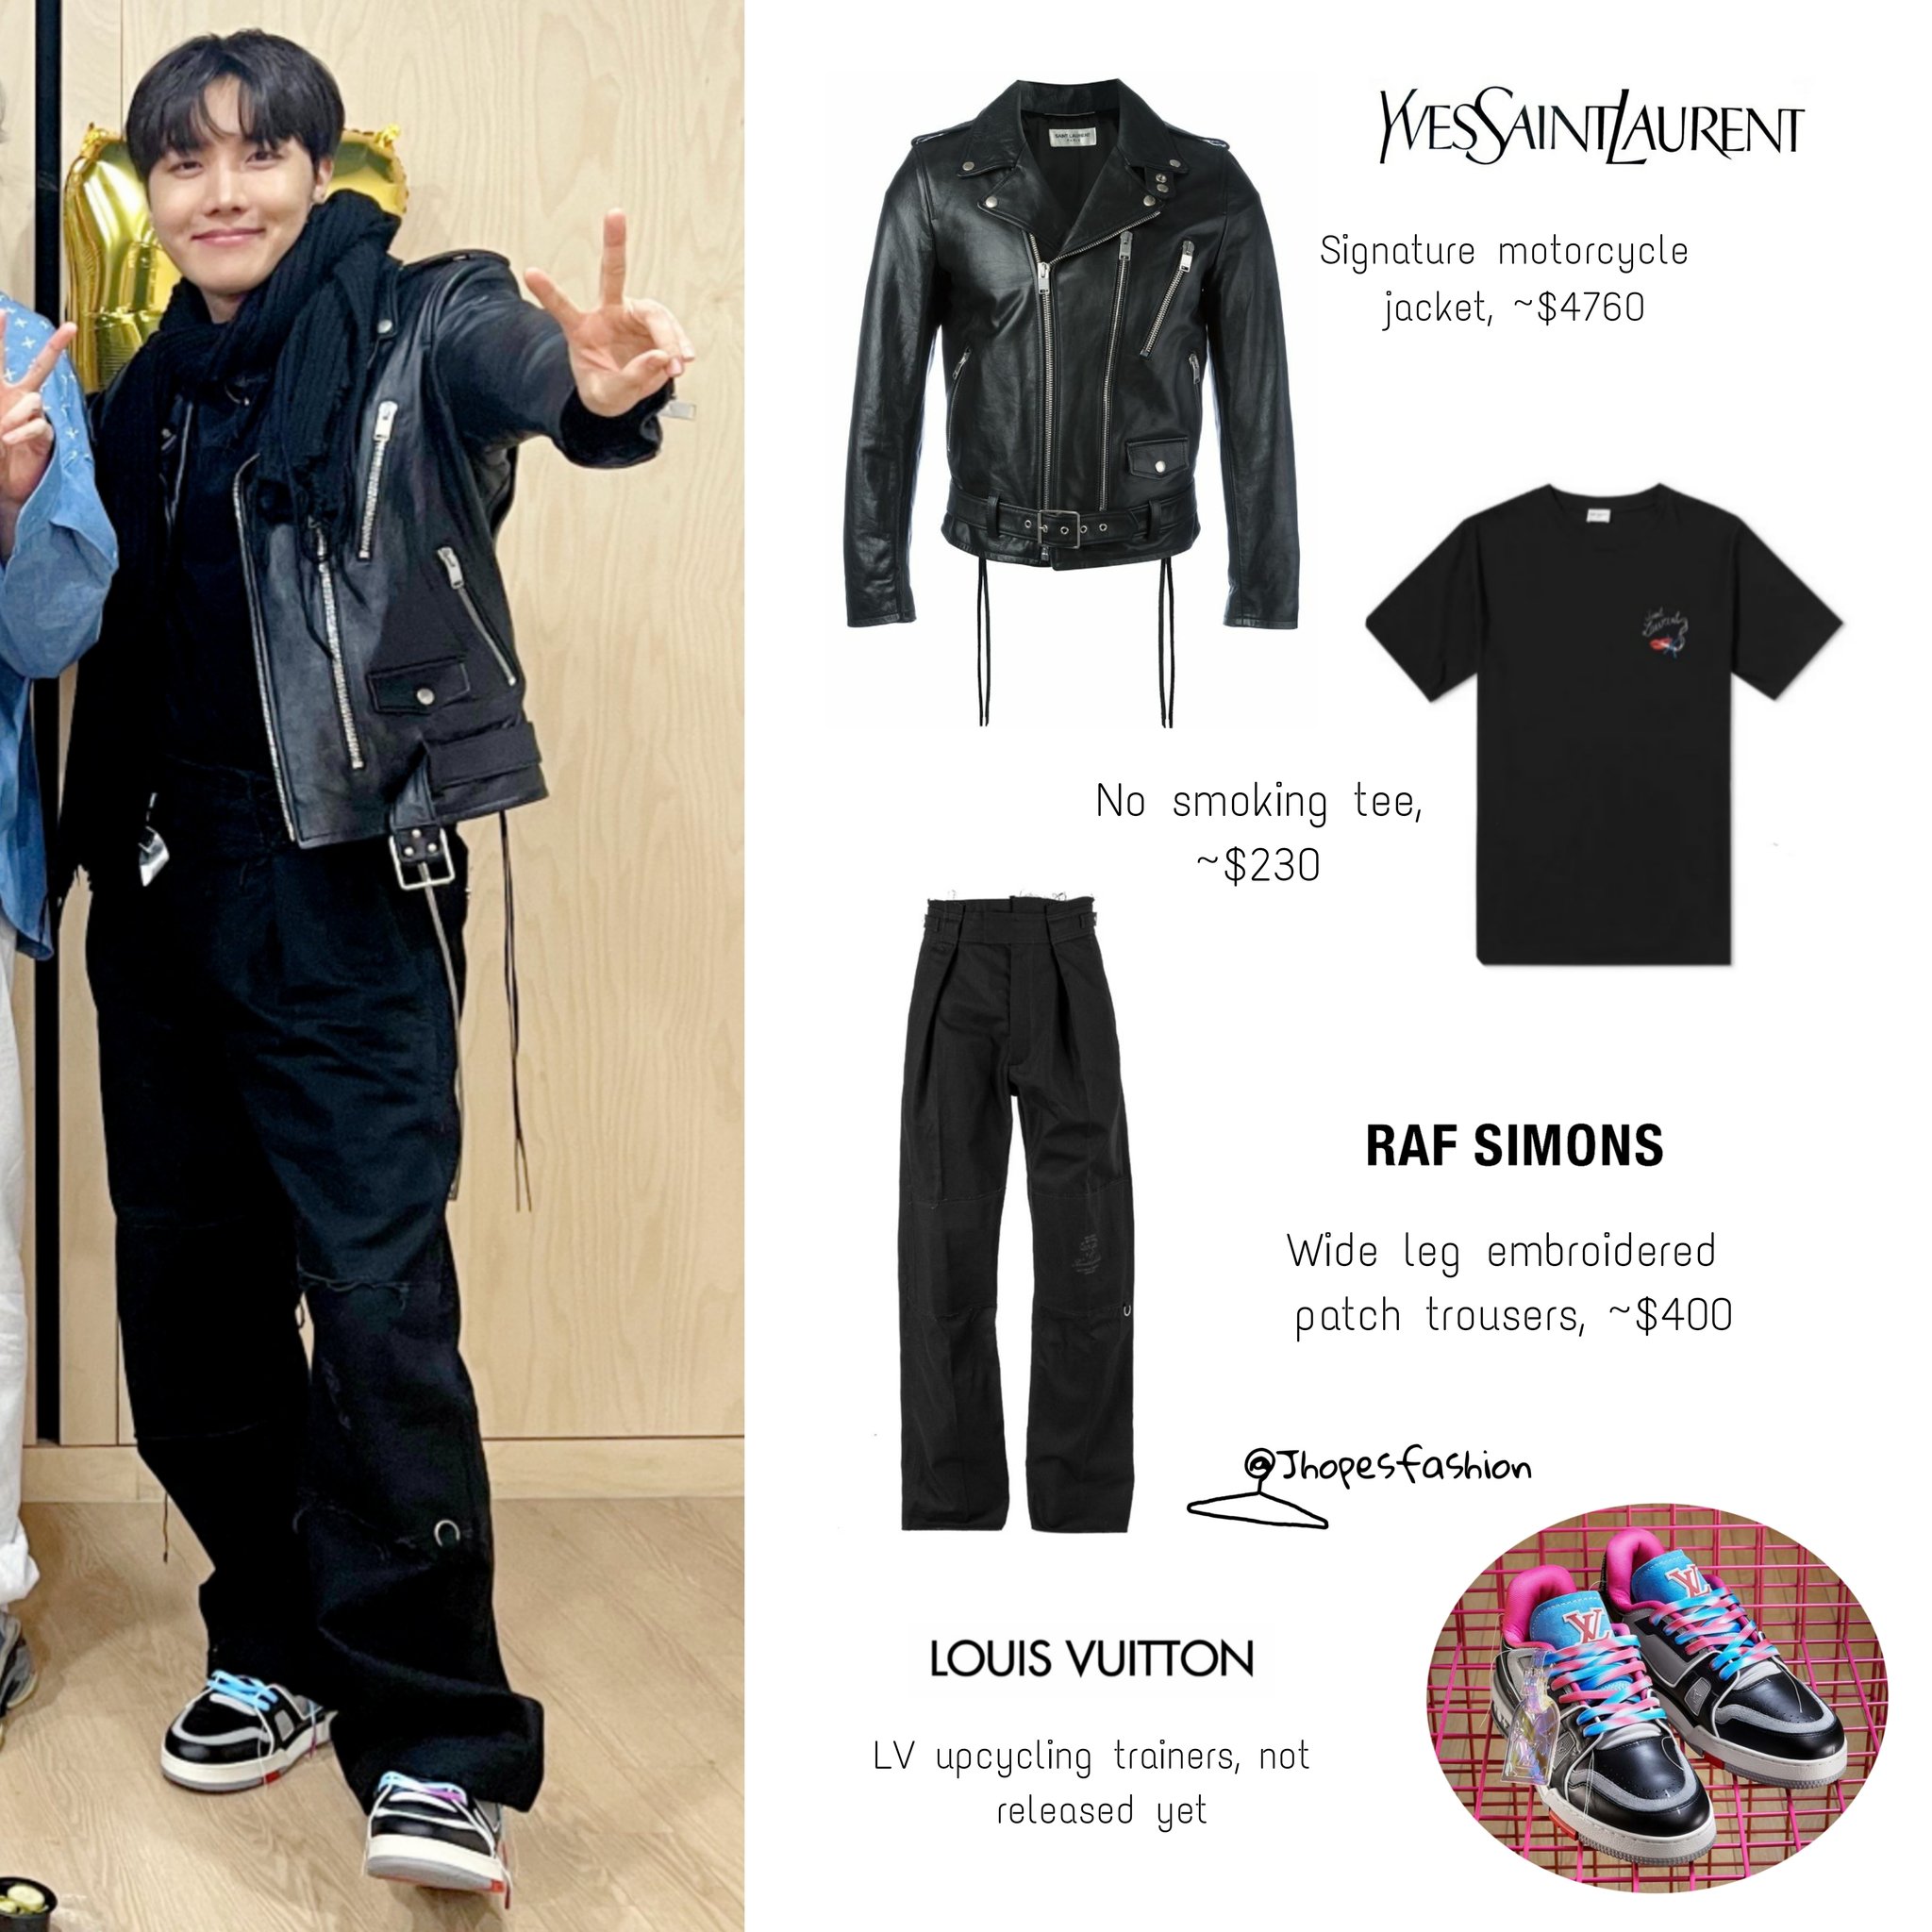 j-hope's closet (rest) on X: Hoseok's Louis Vuitton jacket, shorts and  trainers 210321 - You Quiz on the block #Jhope #제이홉 #Jhopefashion #BTS   / X